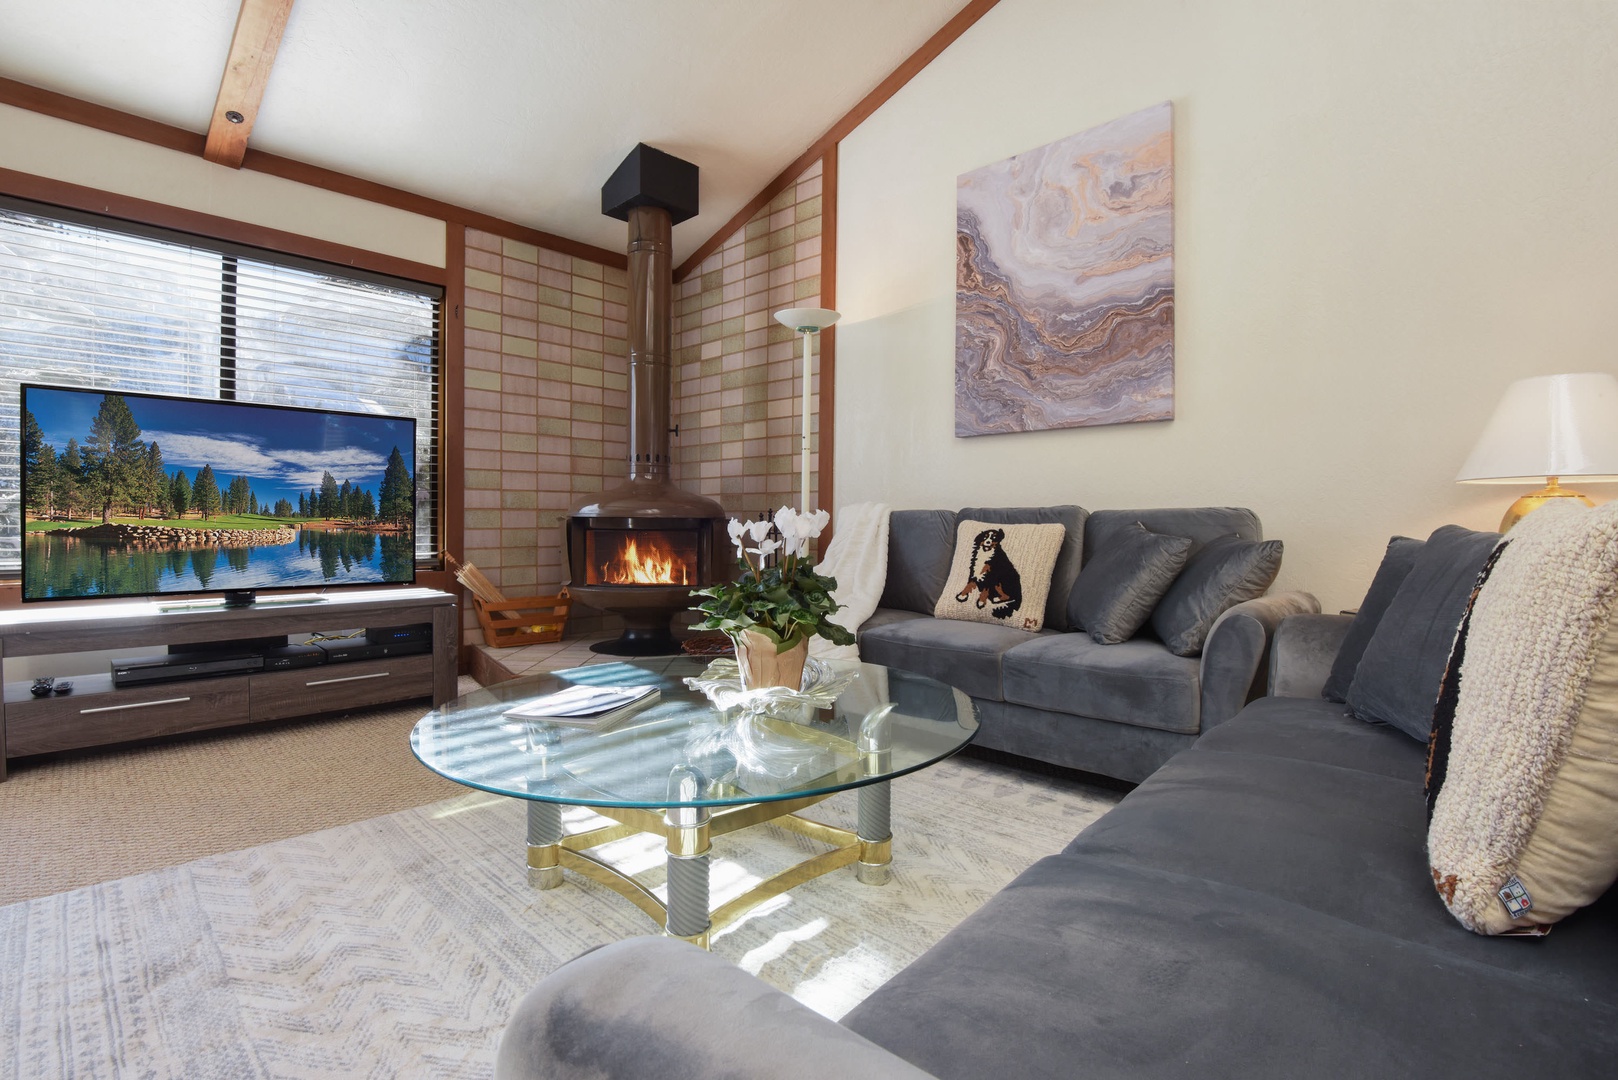 Living room with flat screen TV, wood burning fireplace, balcony access and high ceilings